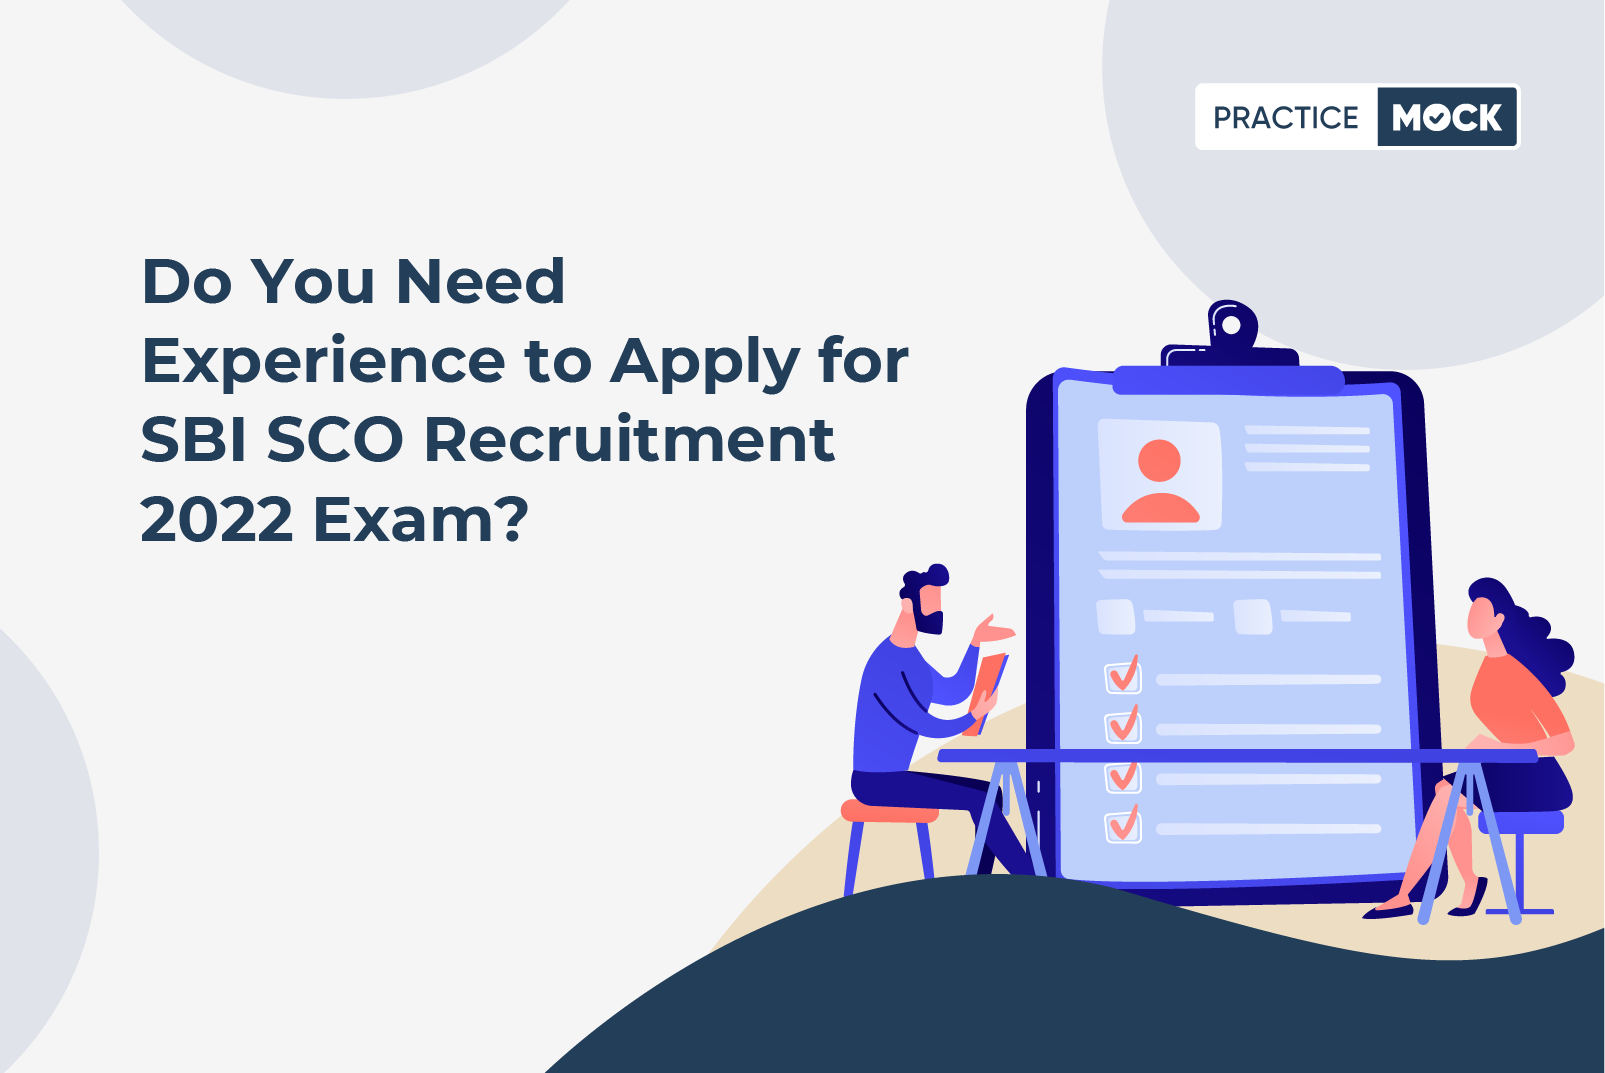 Is work experience necessary for the SBI SCO exam